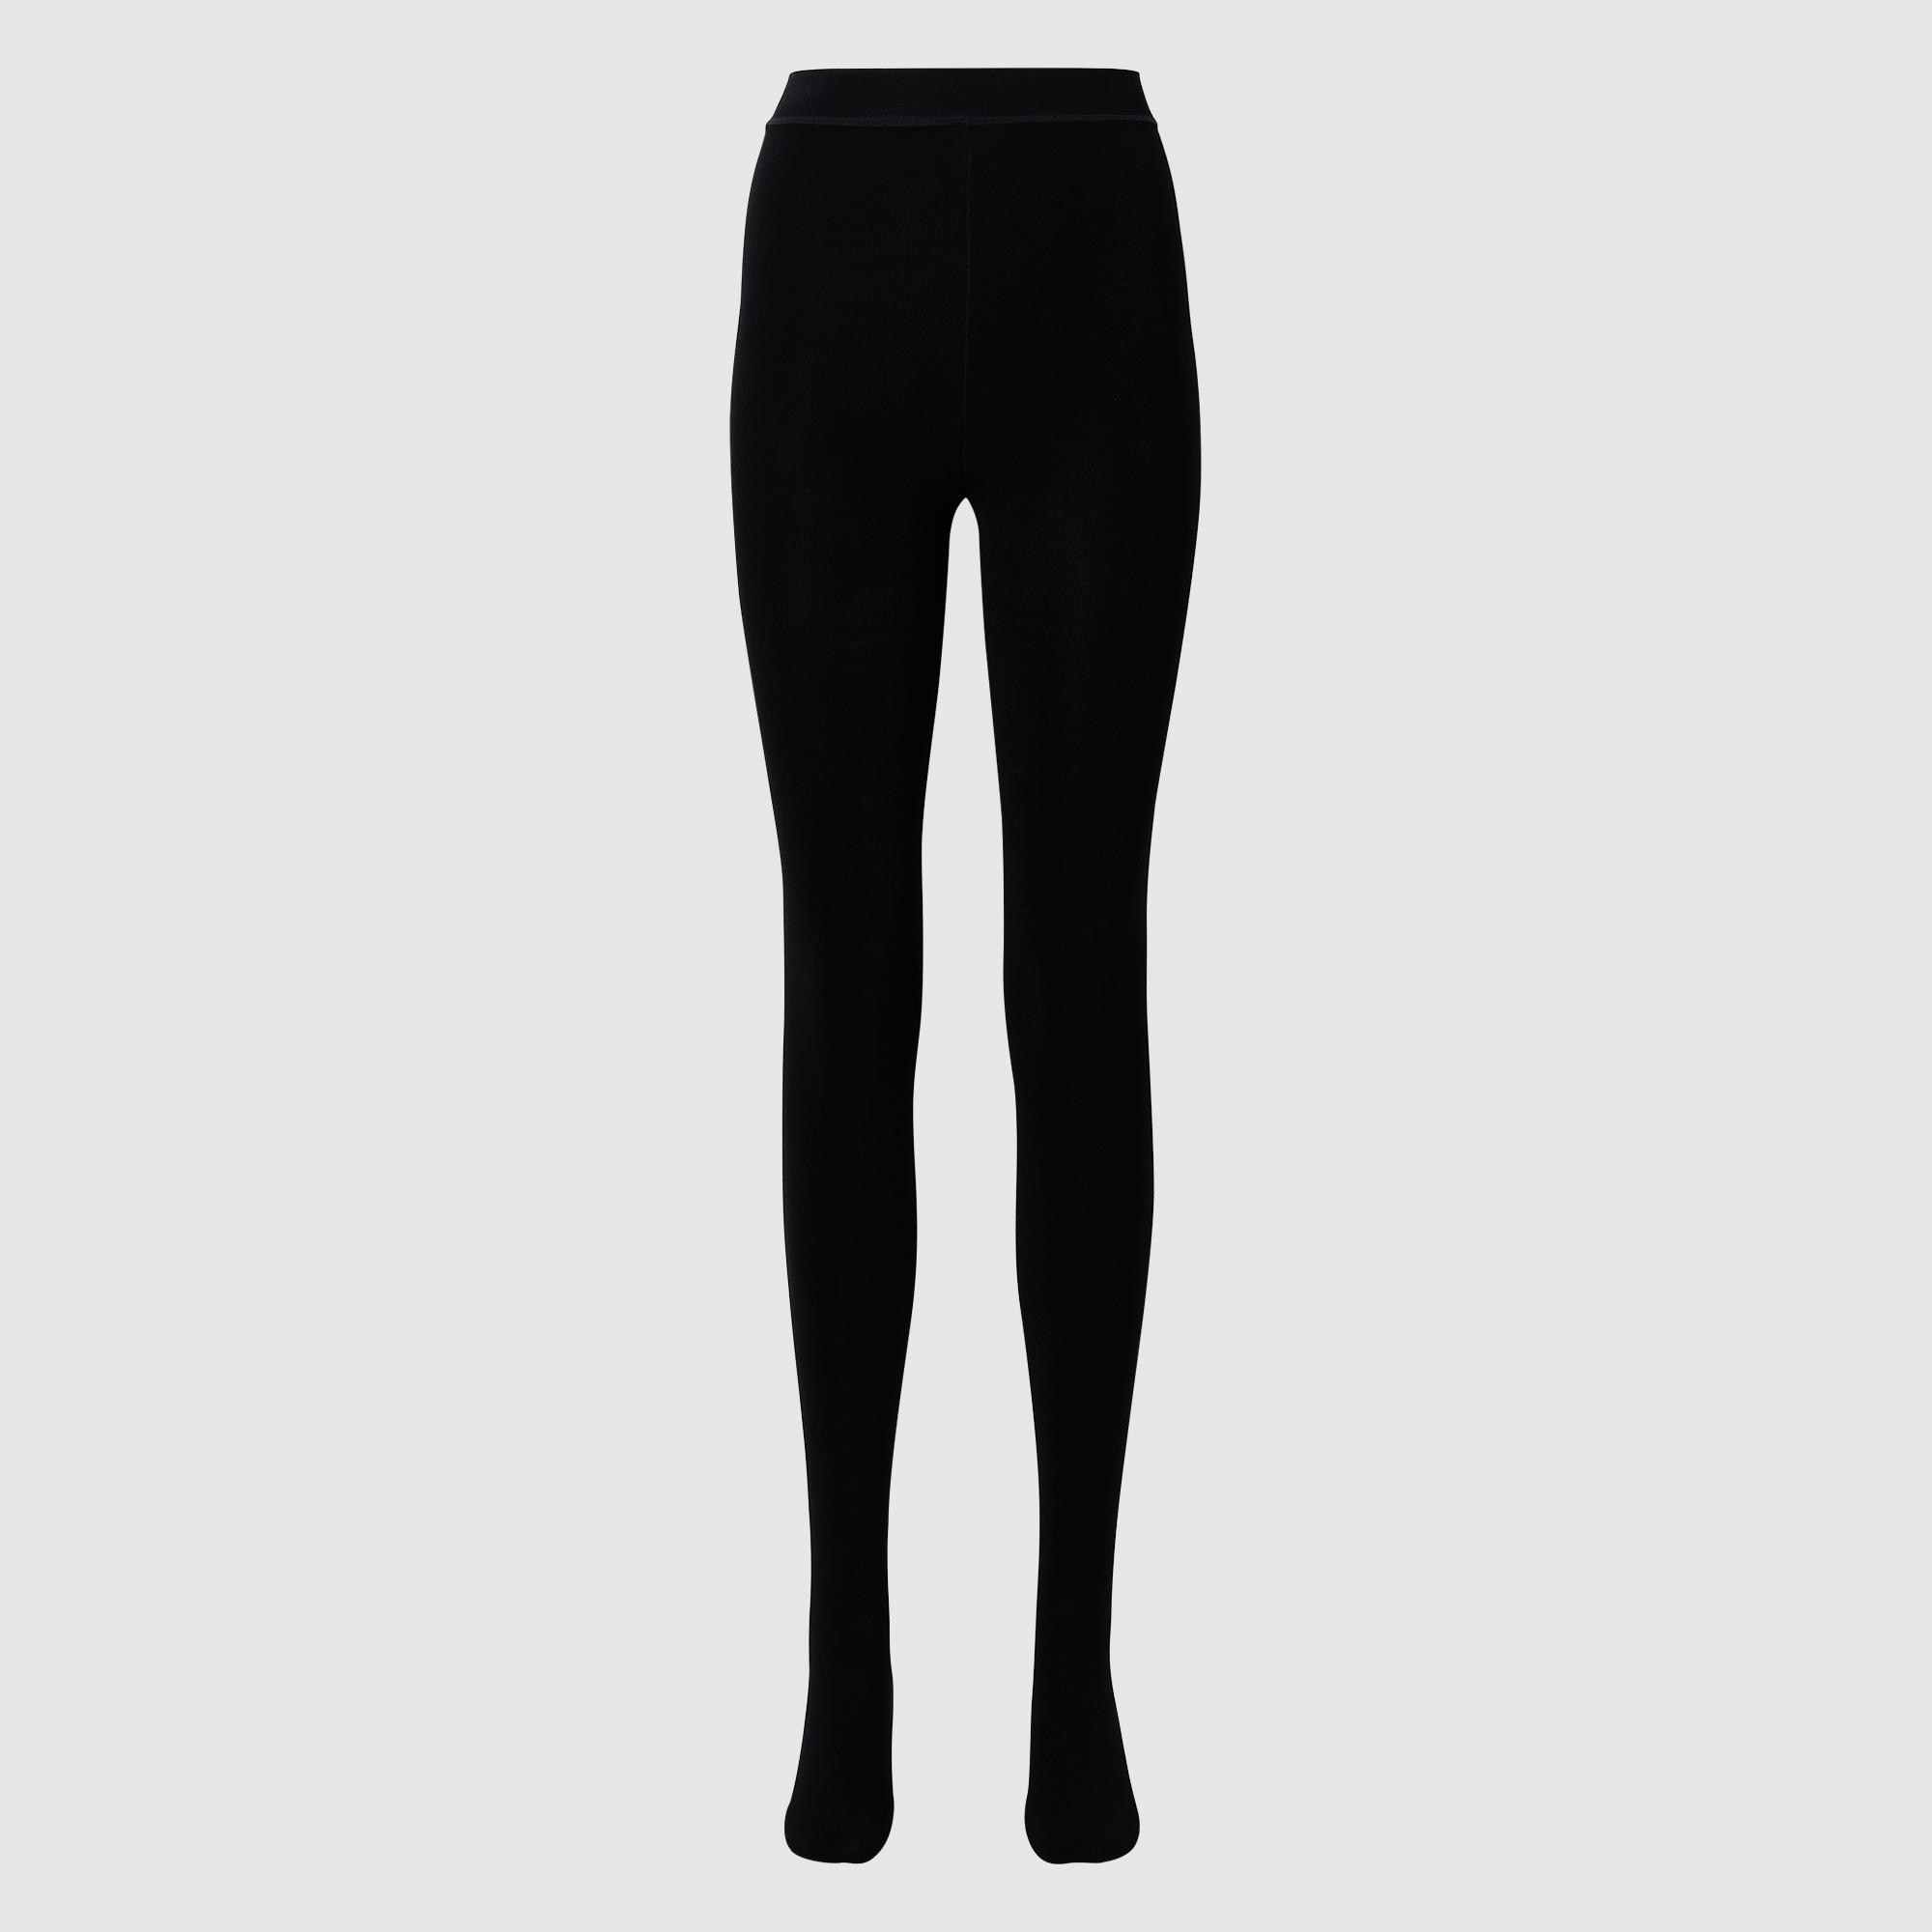 UNIQLO MEN'S HEATTECH Tights From Japan ( X 3 )